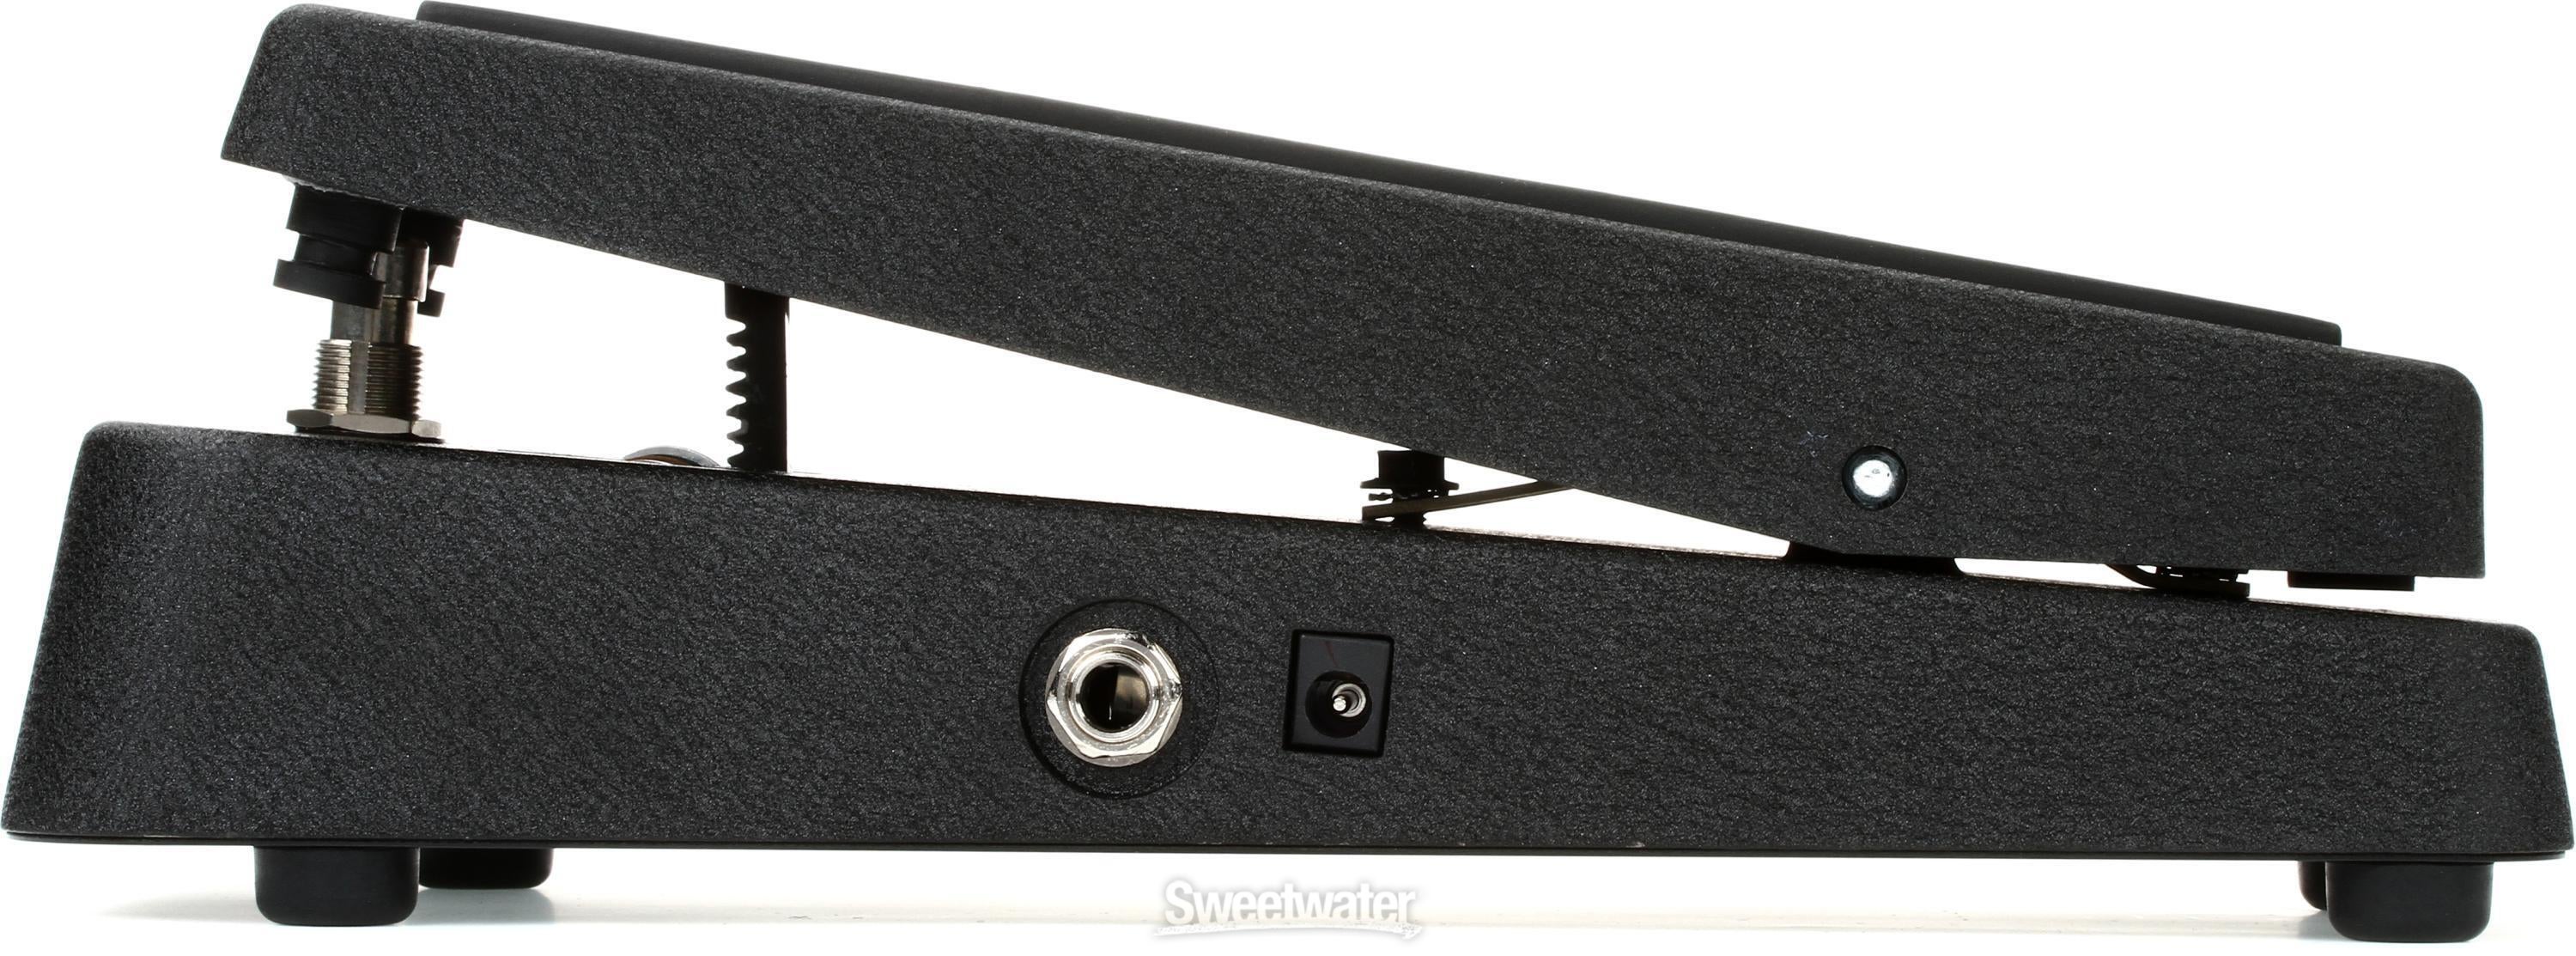 Vox V845 Classic Wah Pedal | Sweetwater